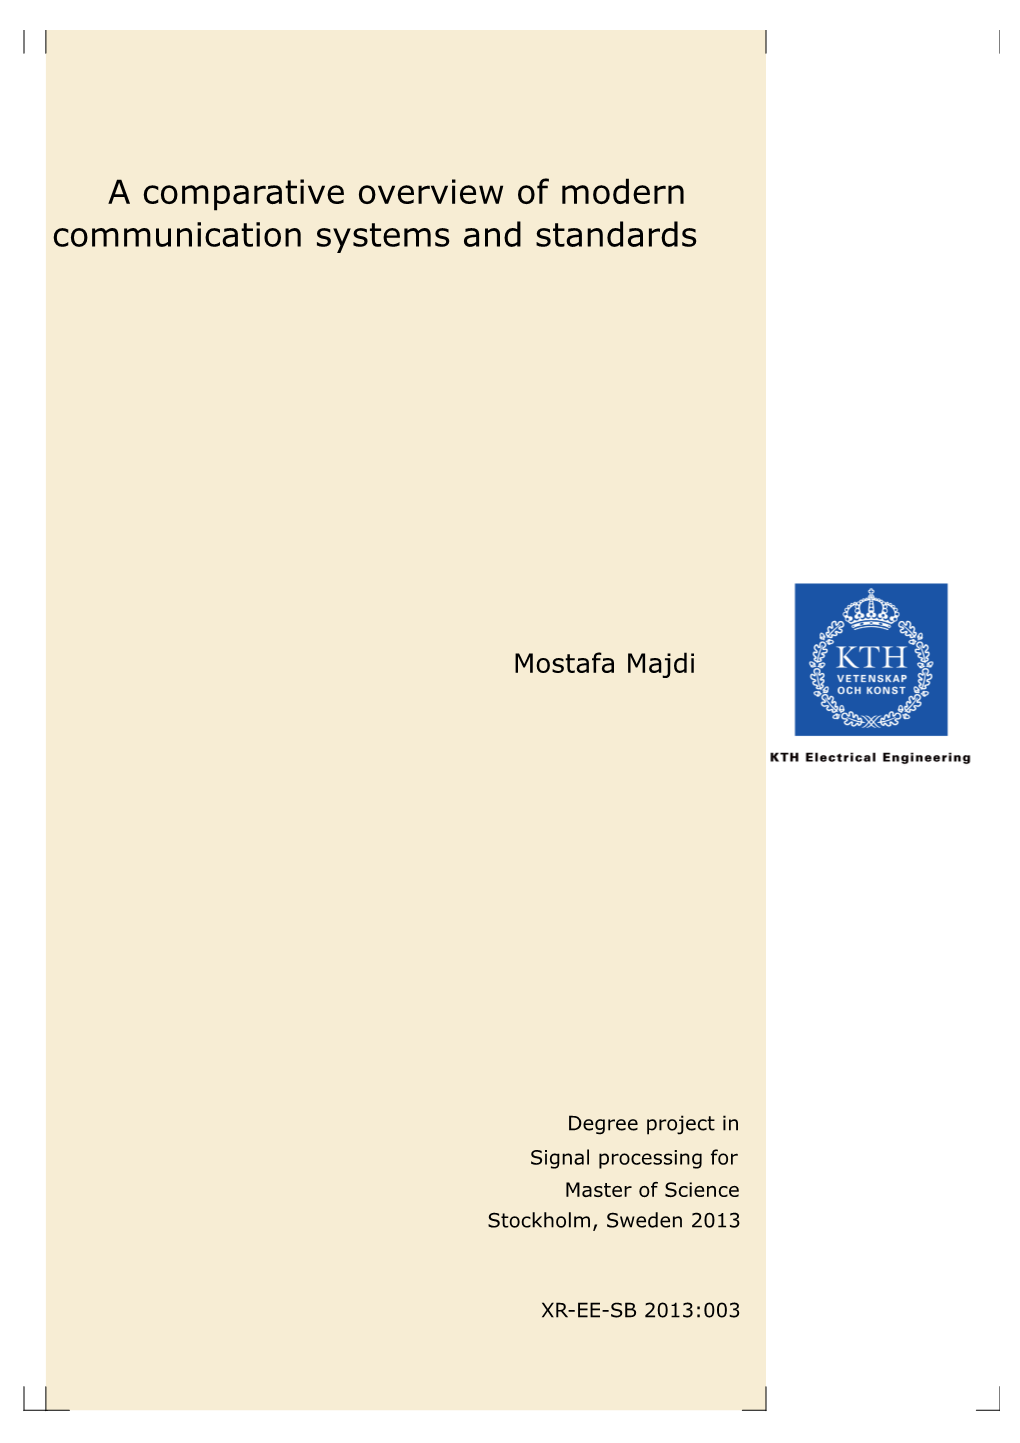 A Comparative Overview of Modern Communication Systems and Standards